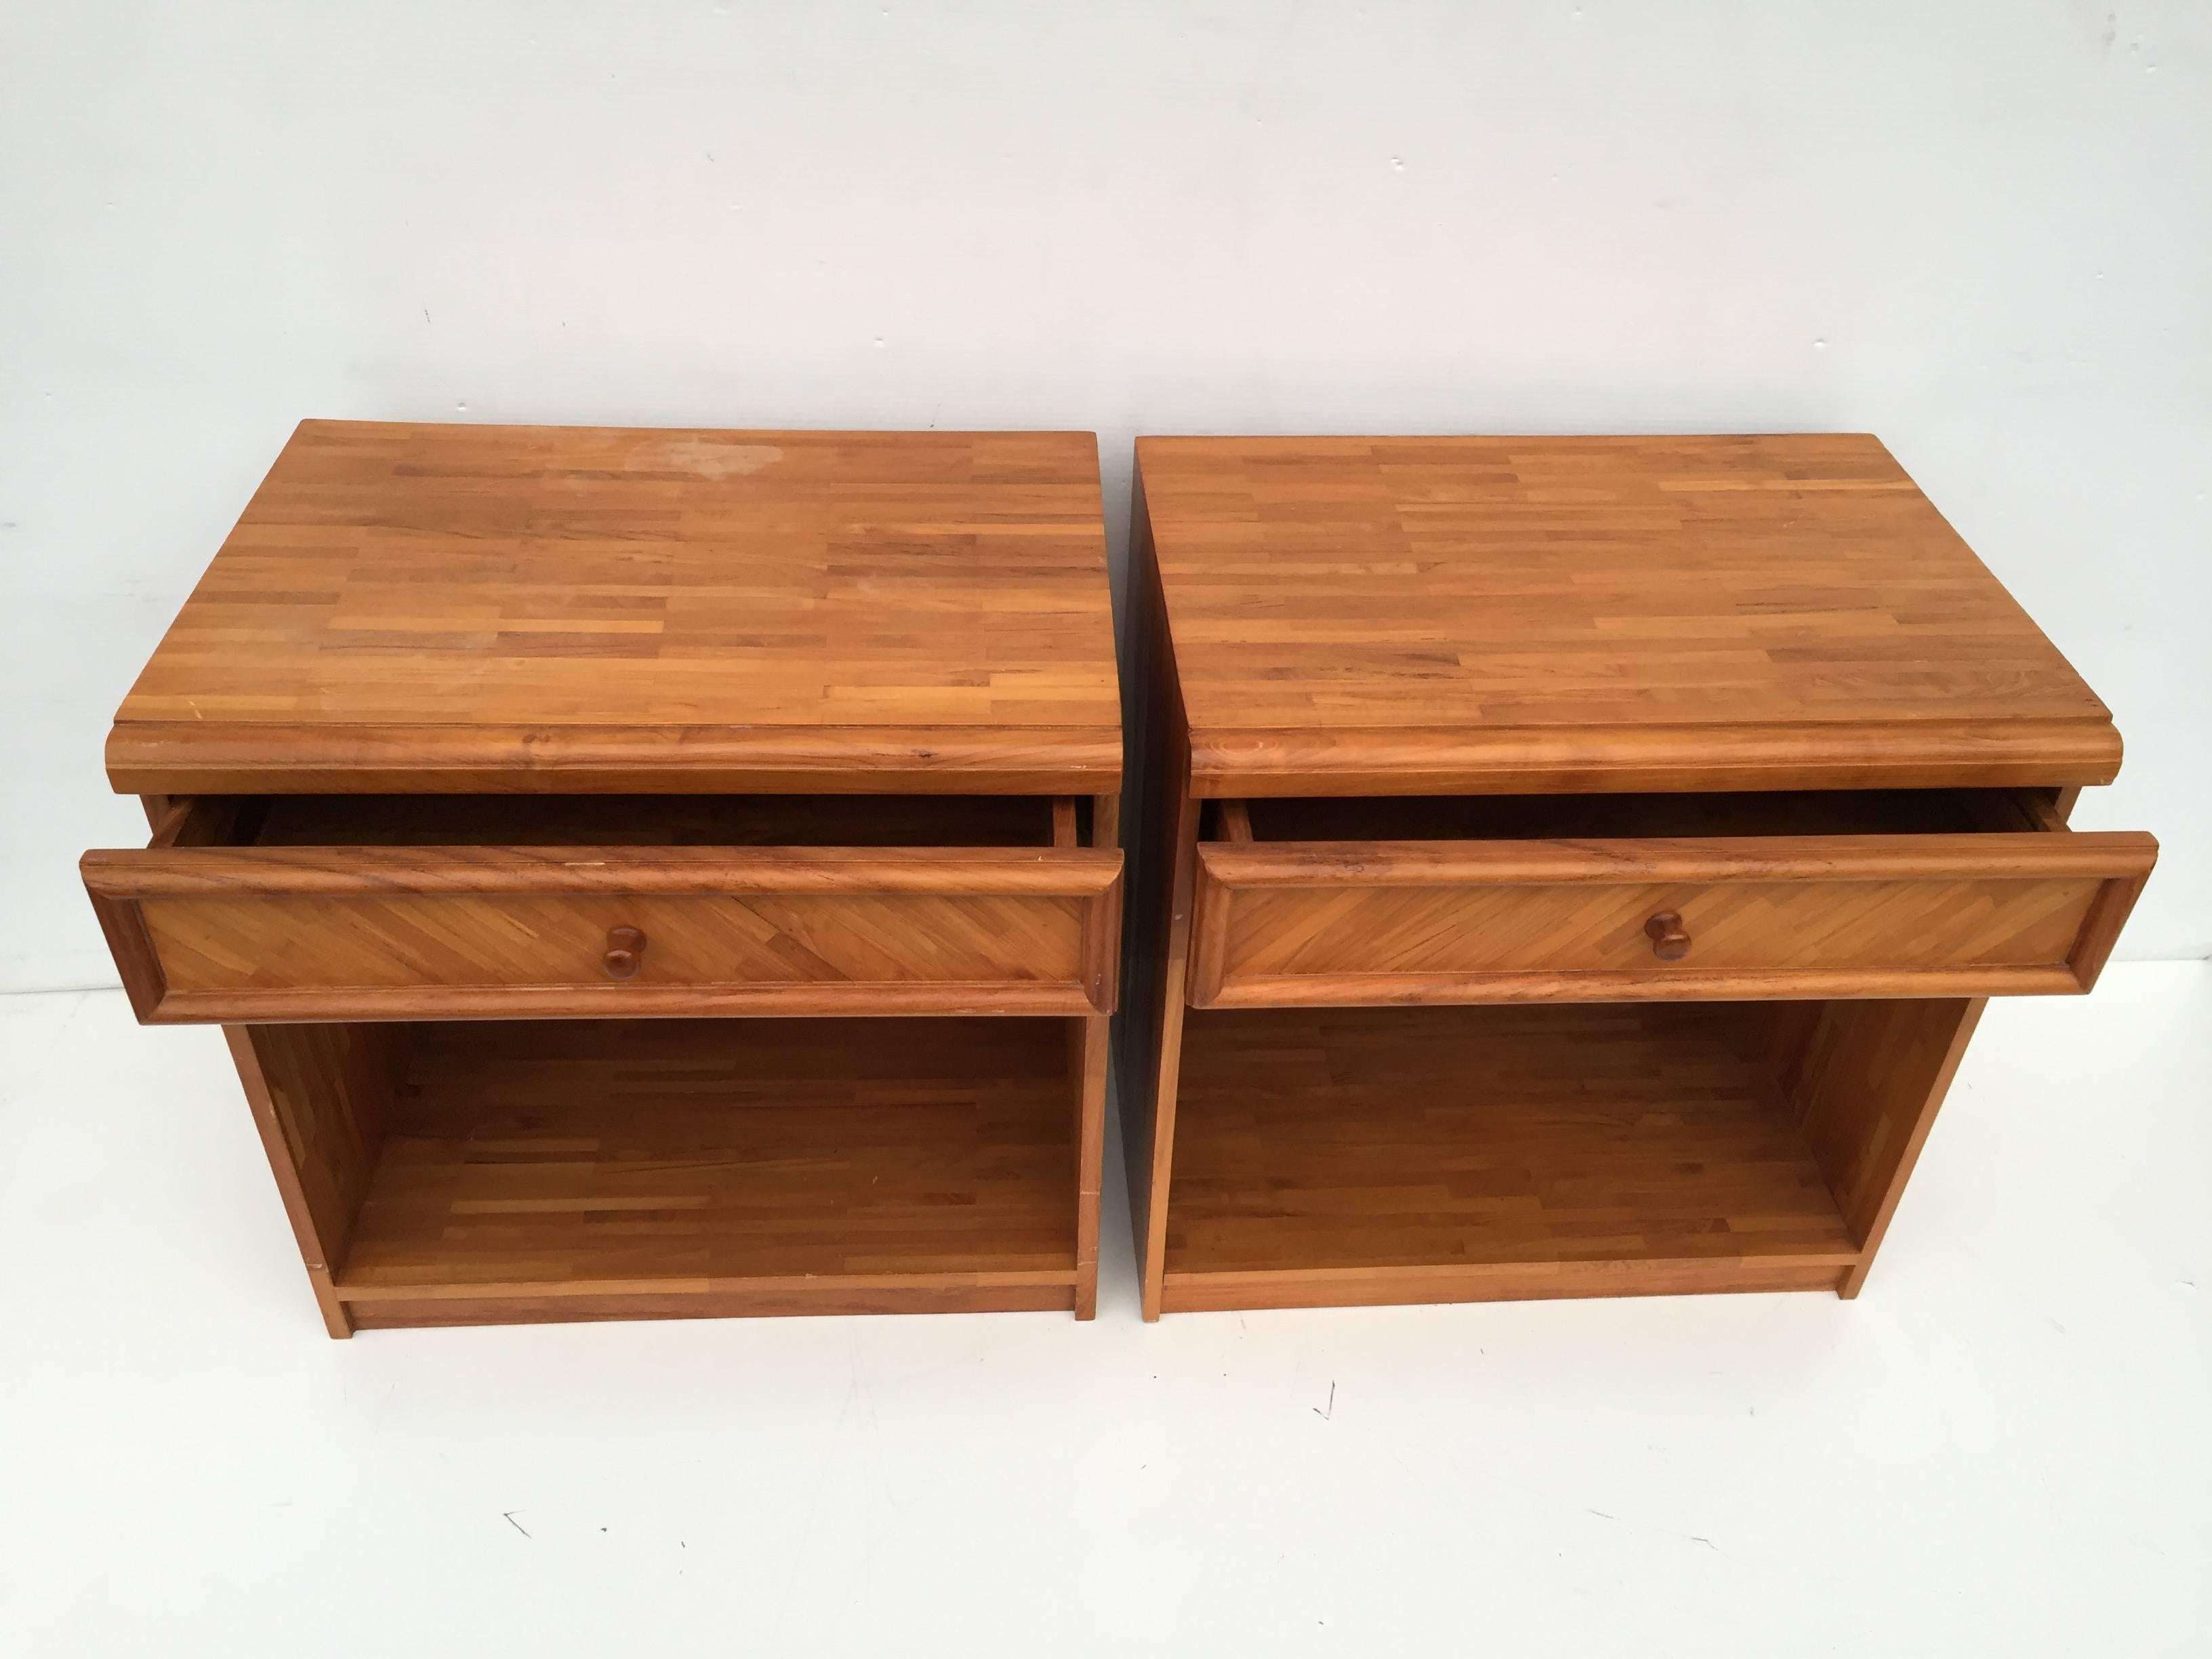 Pair of patch work nightstand, lamp, side or end tables after Percivql Lafer.